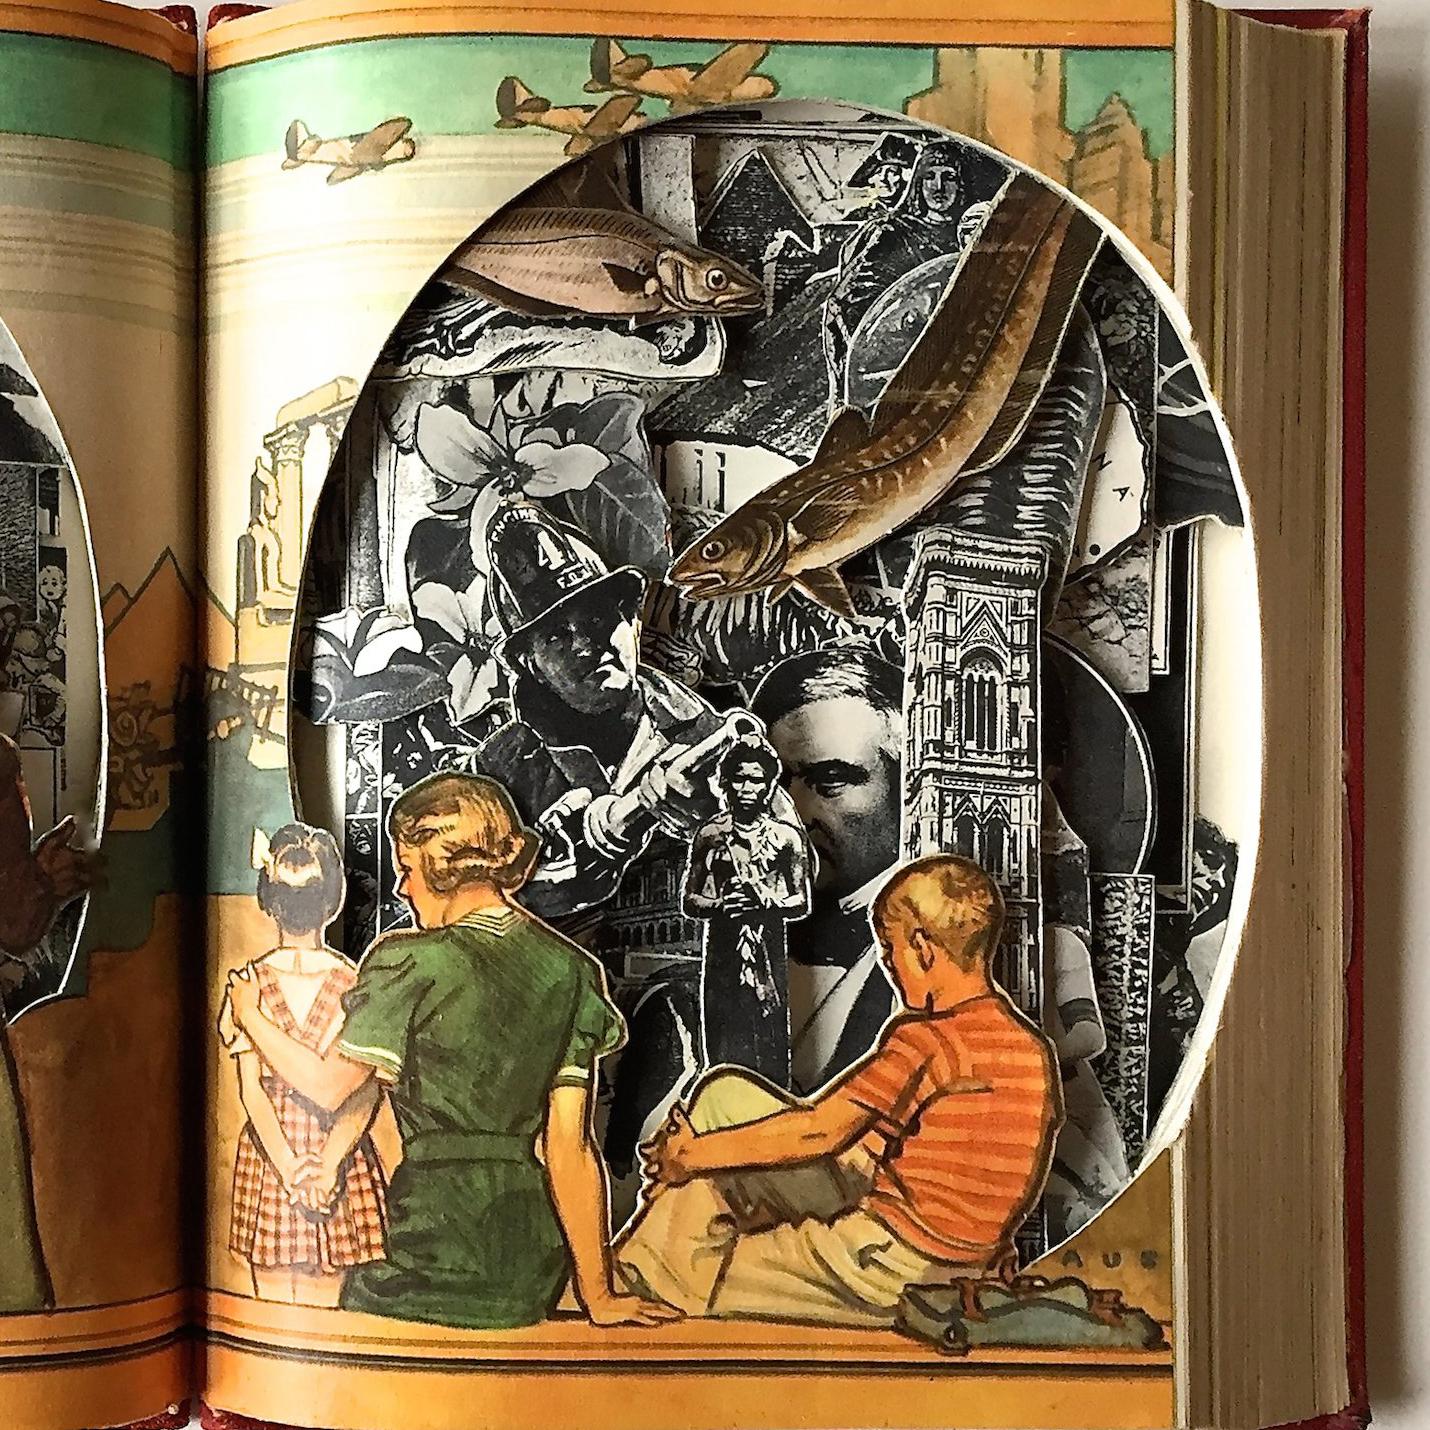 Since 2015, Dagradi has been exploring the compelling visual possibilities of altered books. Choosing vintage and antiquarian texts, he carefully cuts through one page at a time to reveal existing images in a three dimensional collage or sculpture.